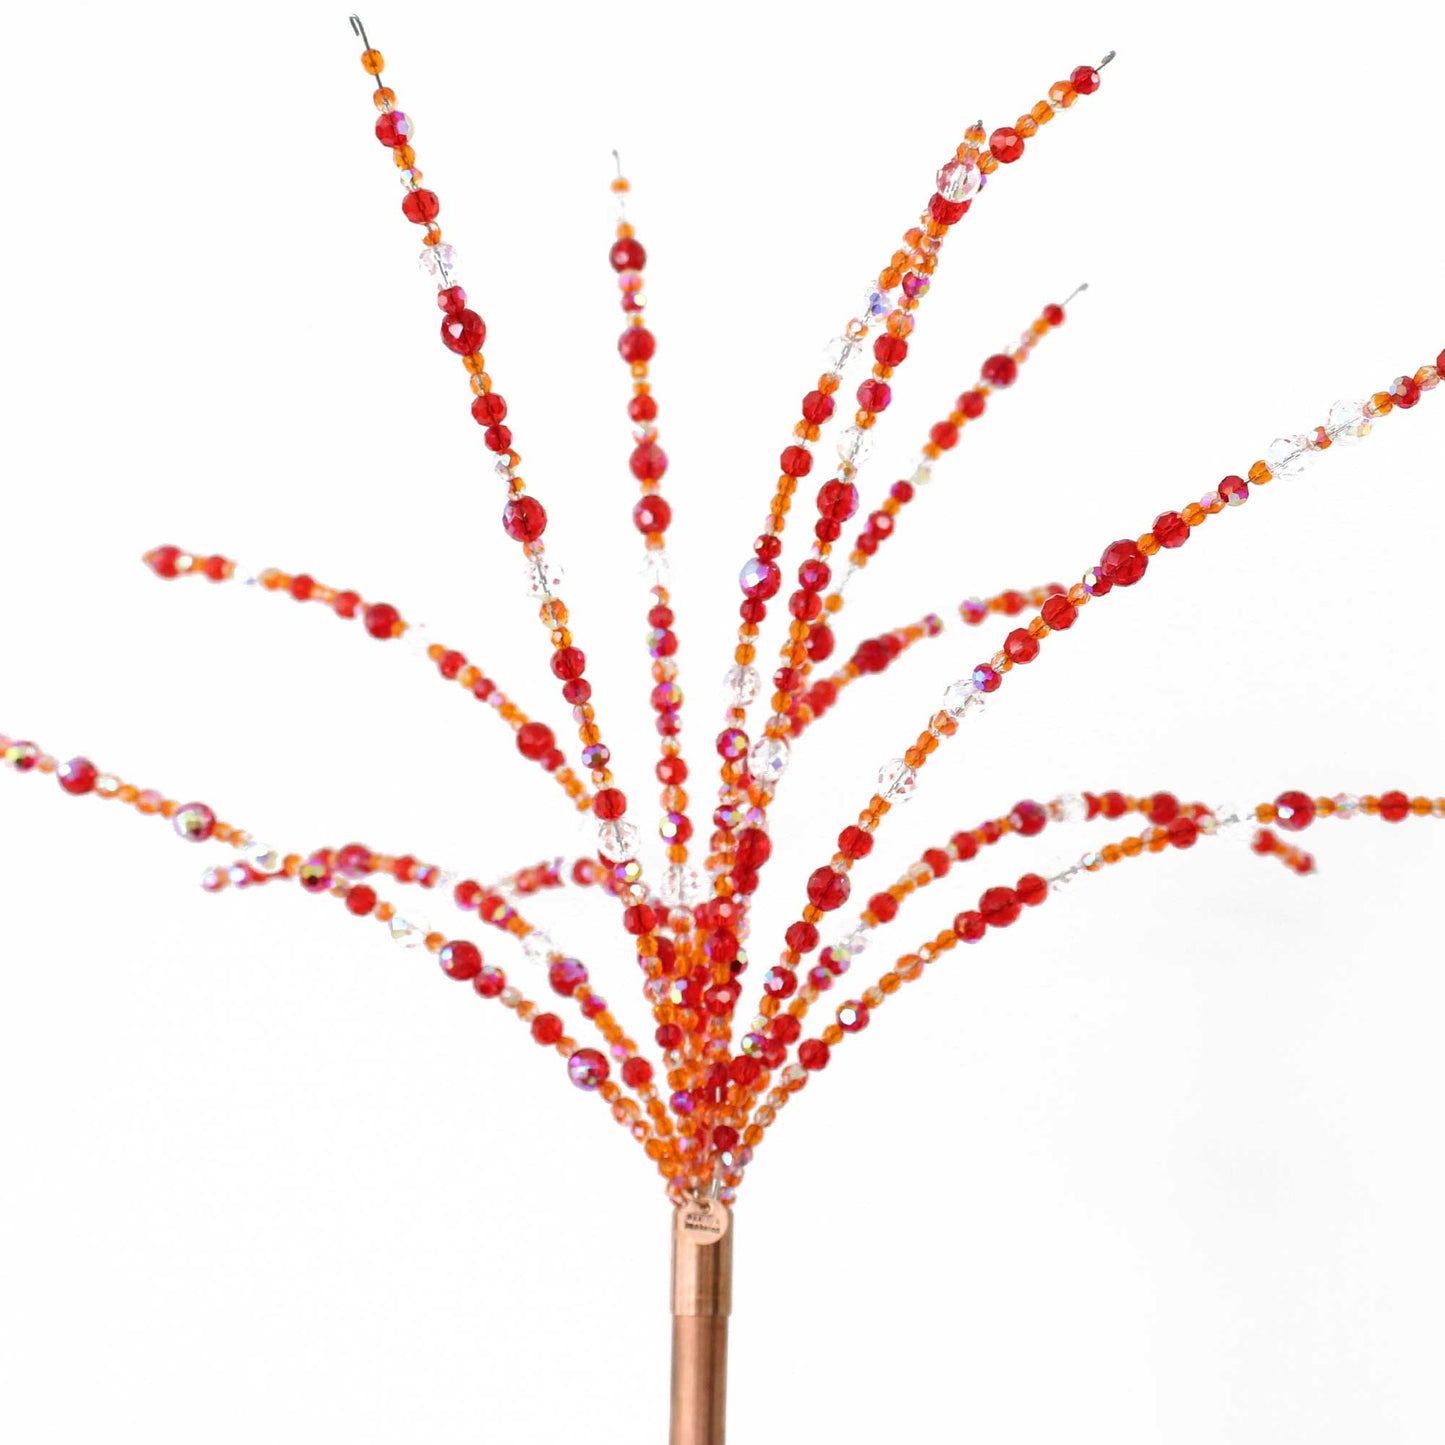 Load image into Gallery viewer, Red and Orange Crystal Bead Garden Sparkler
